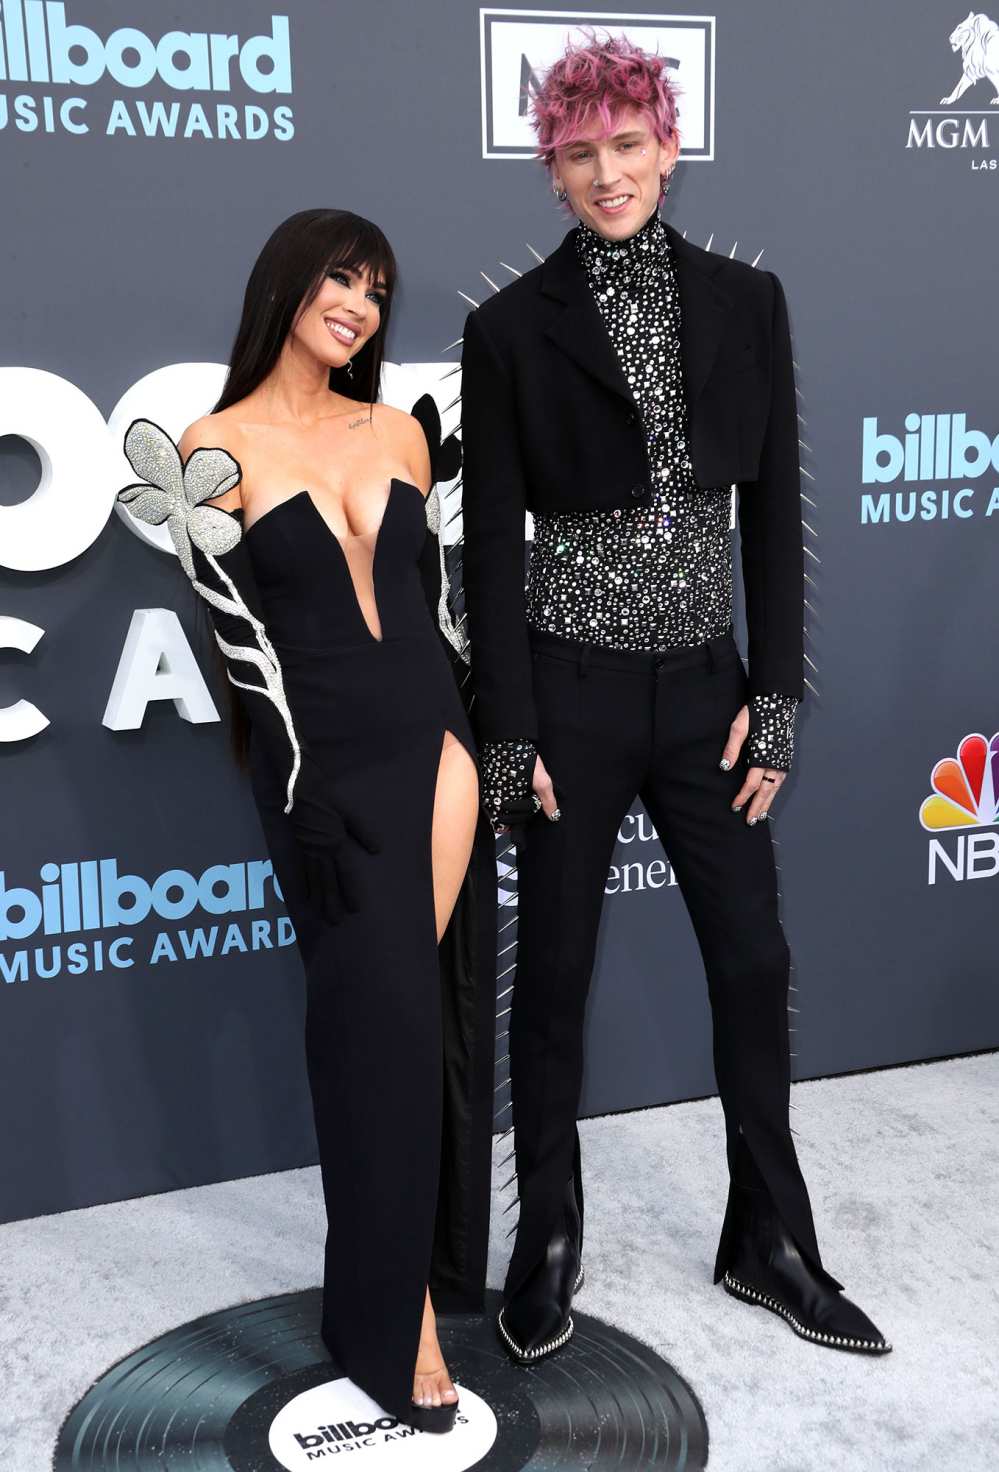 Megan Fox Cut a Hole in Her Jumpsuit to Have Sex With Machine Gun Kelly After 2022 Billboard Music Awards 4